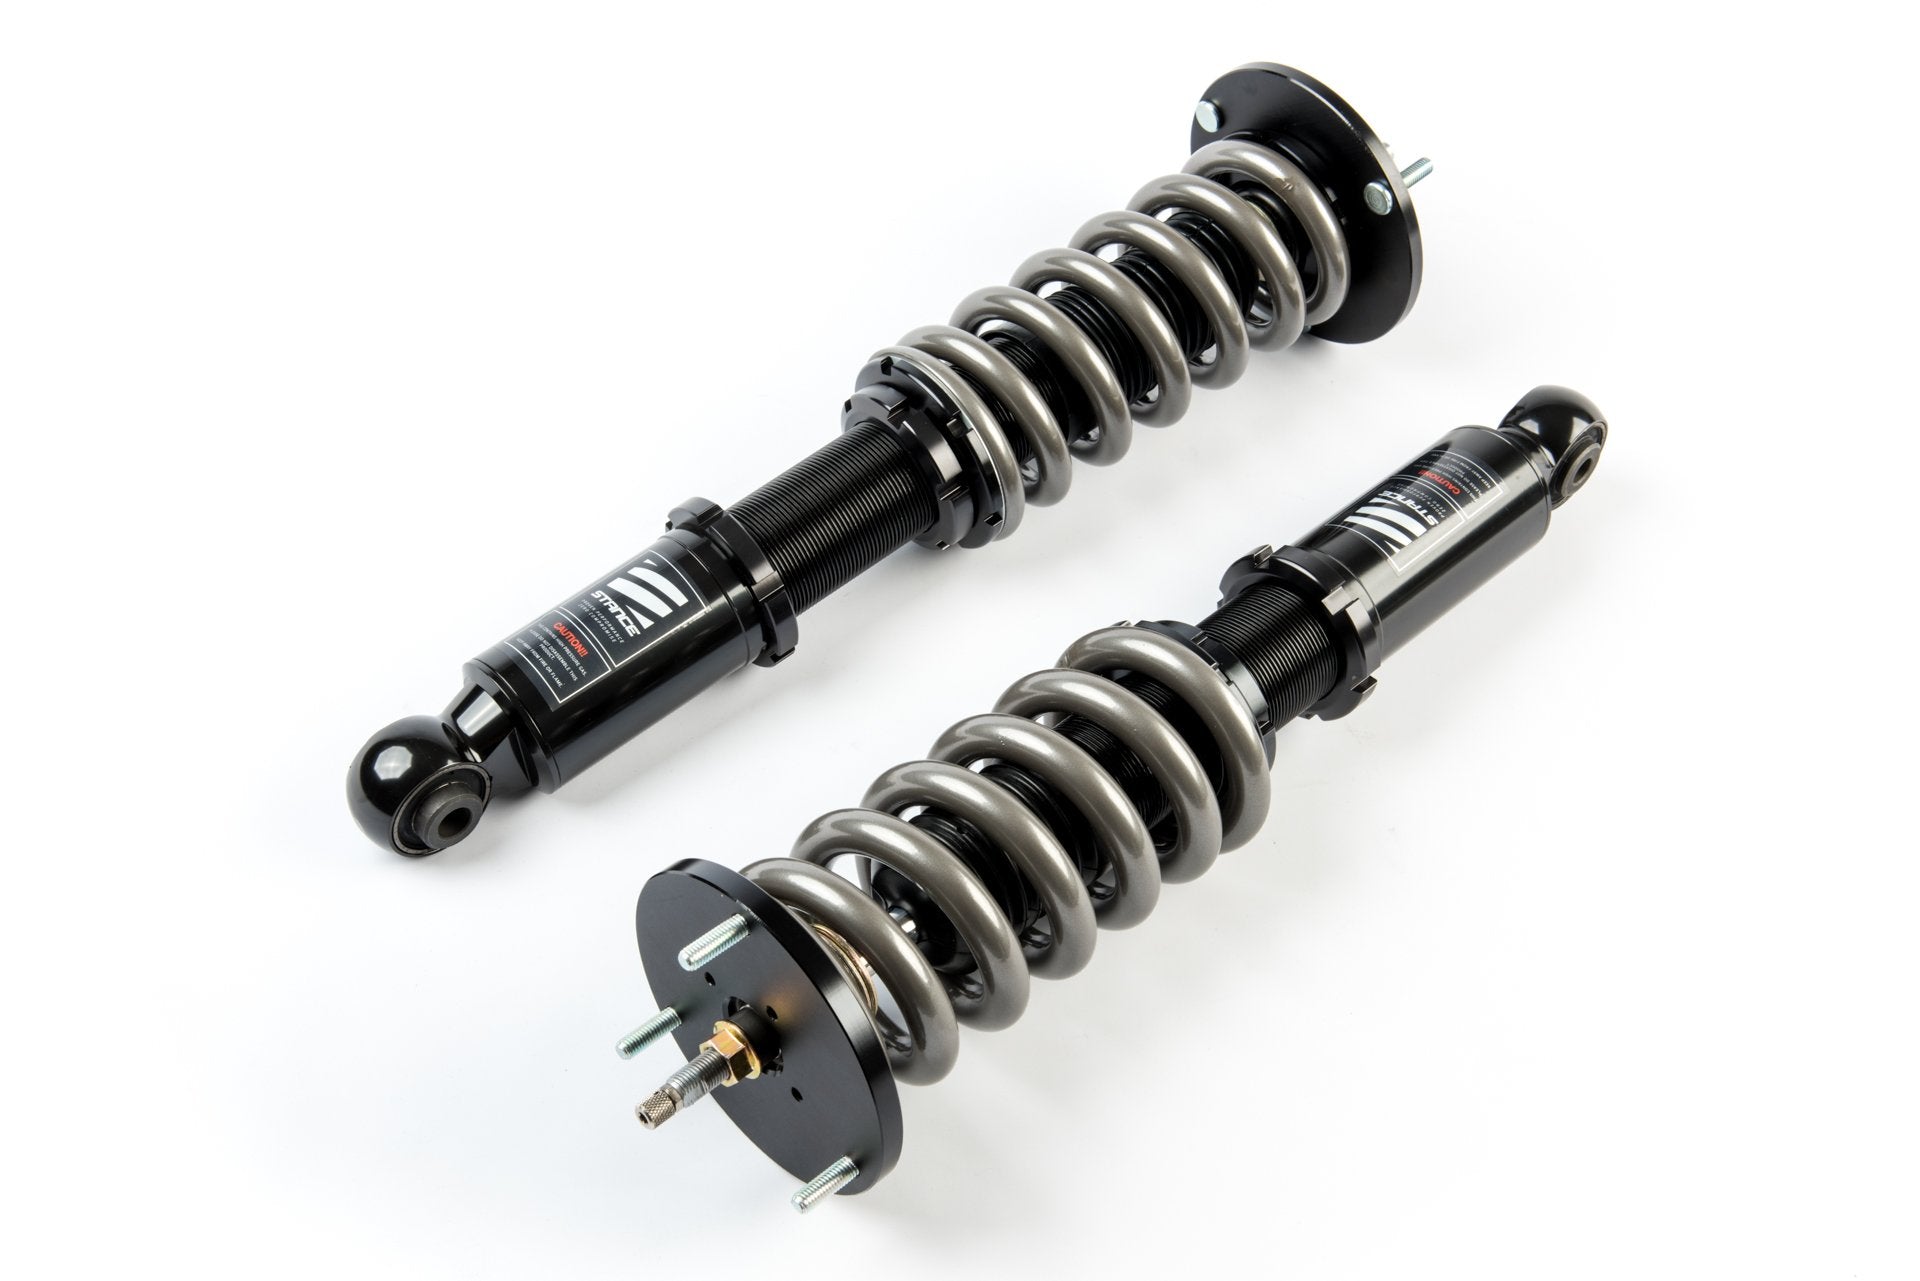 1996-2000 Toyota Chaser Mark II Cresta Stance XR1 Coilover Kit for JZX100